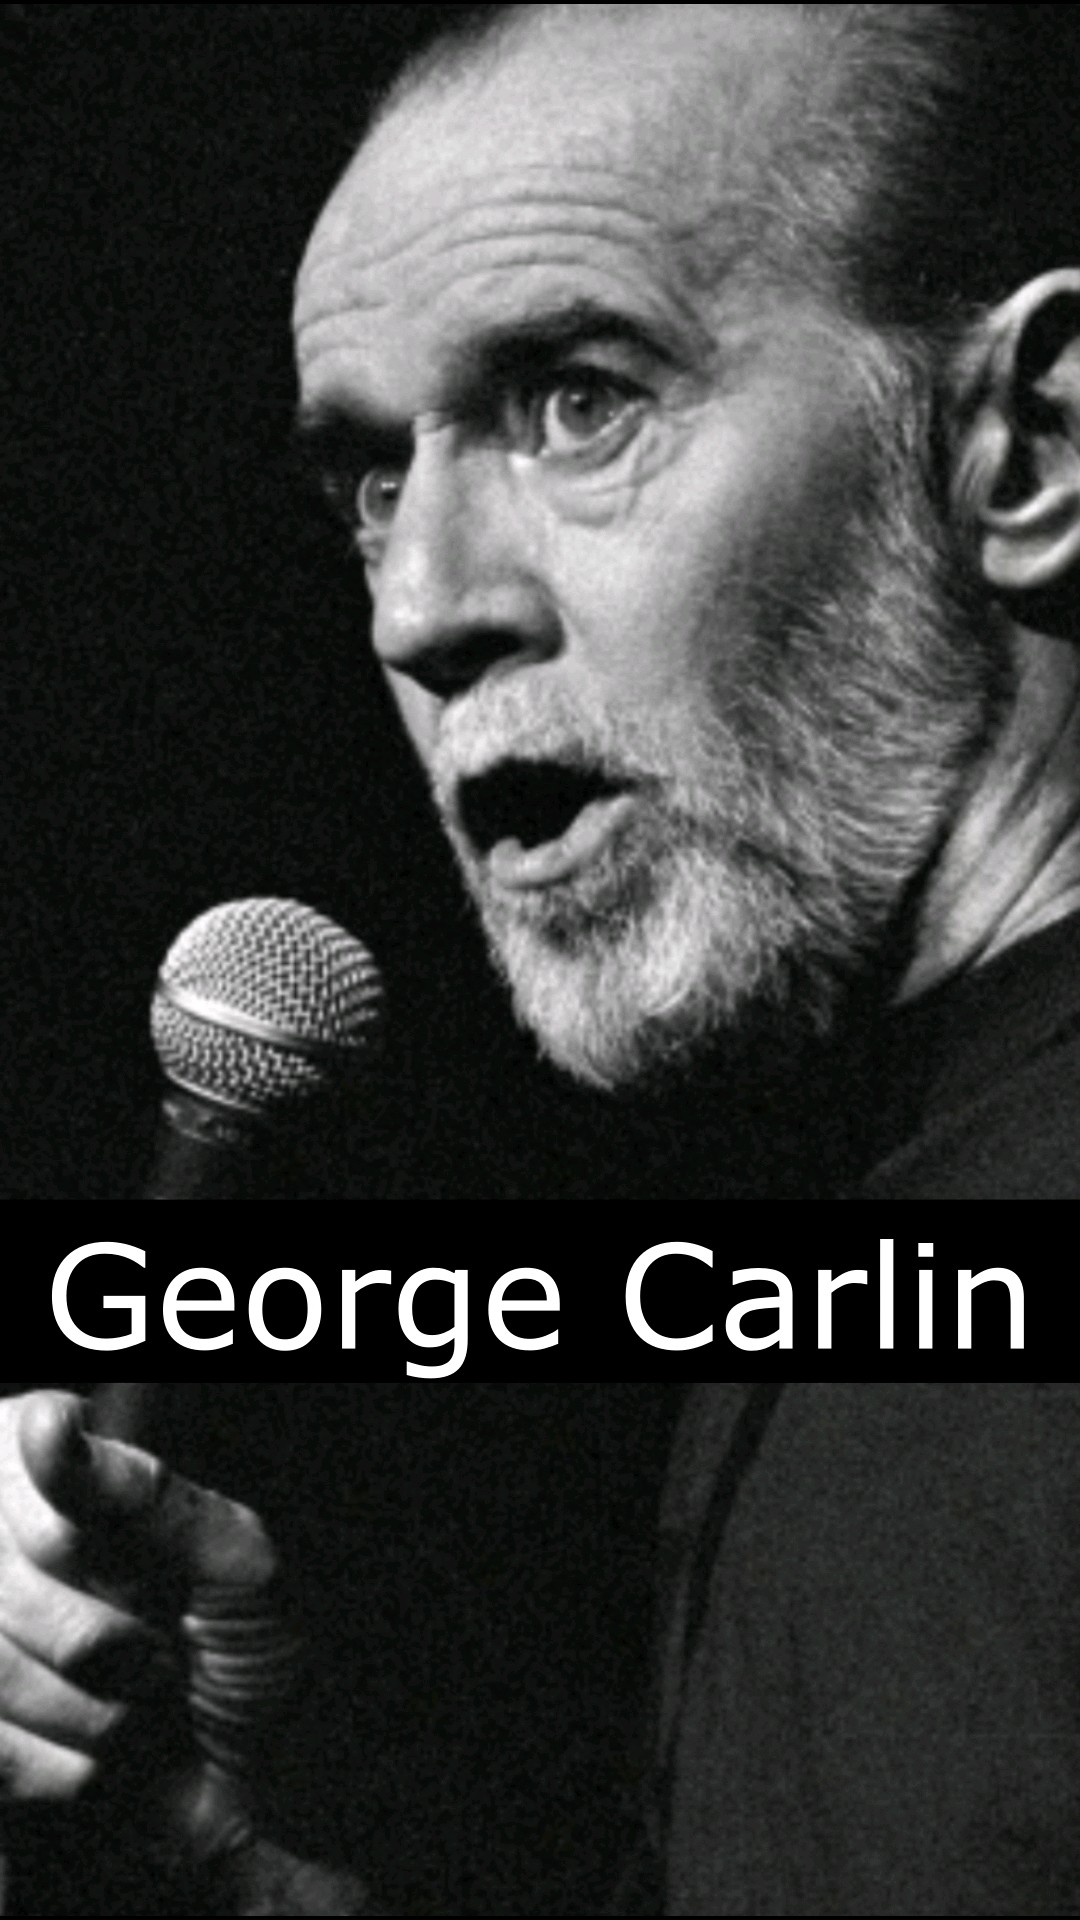 The life and death of George Carlin